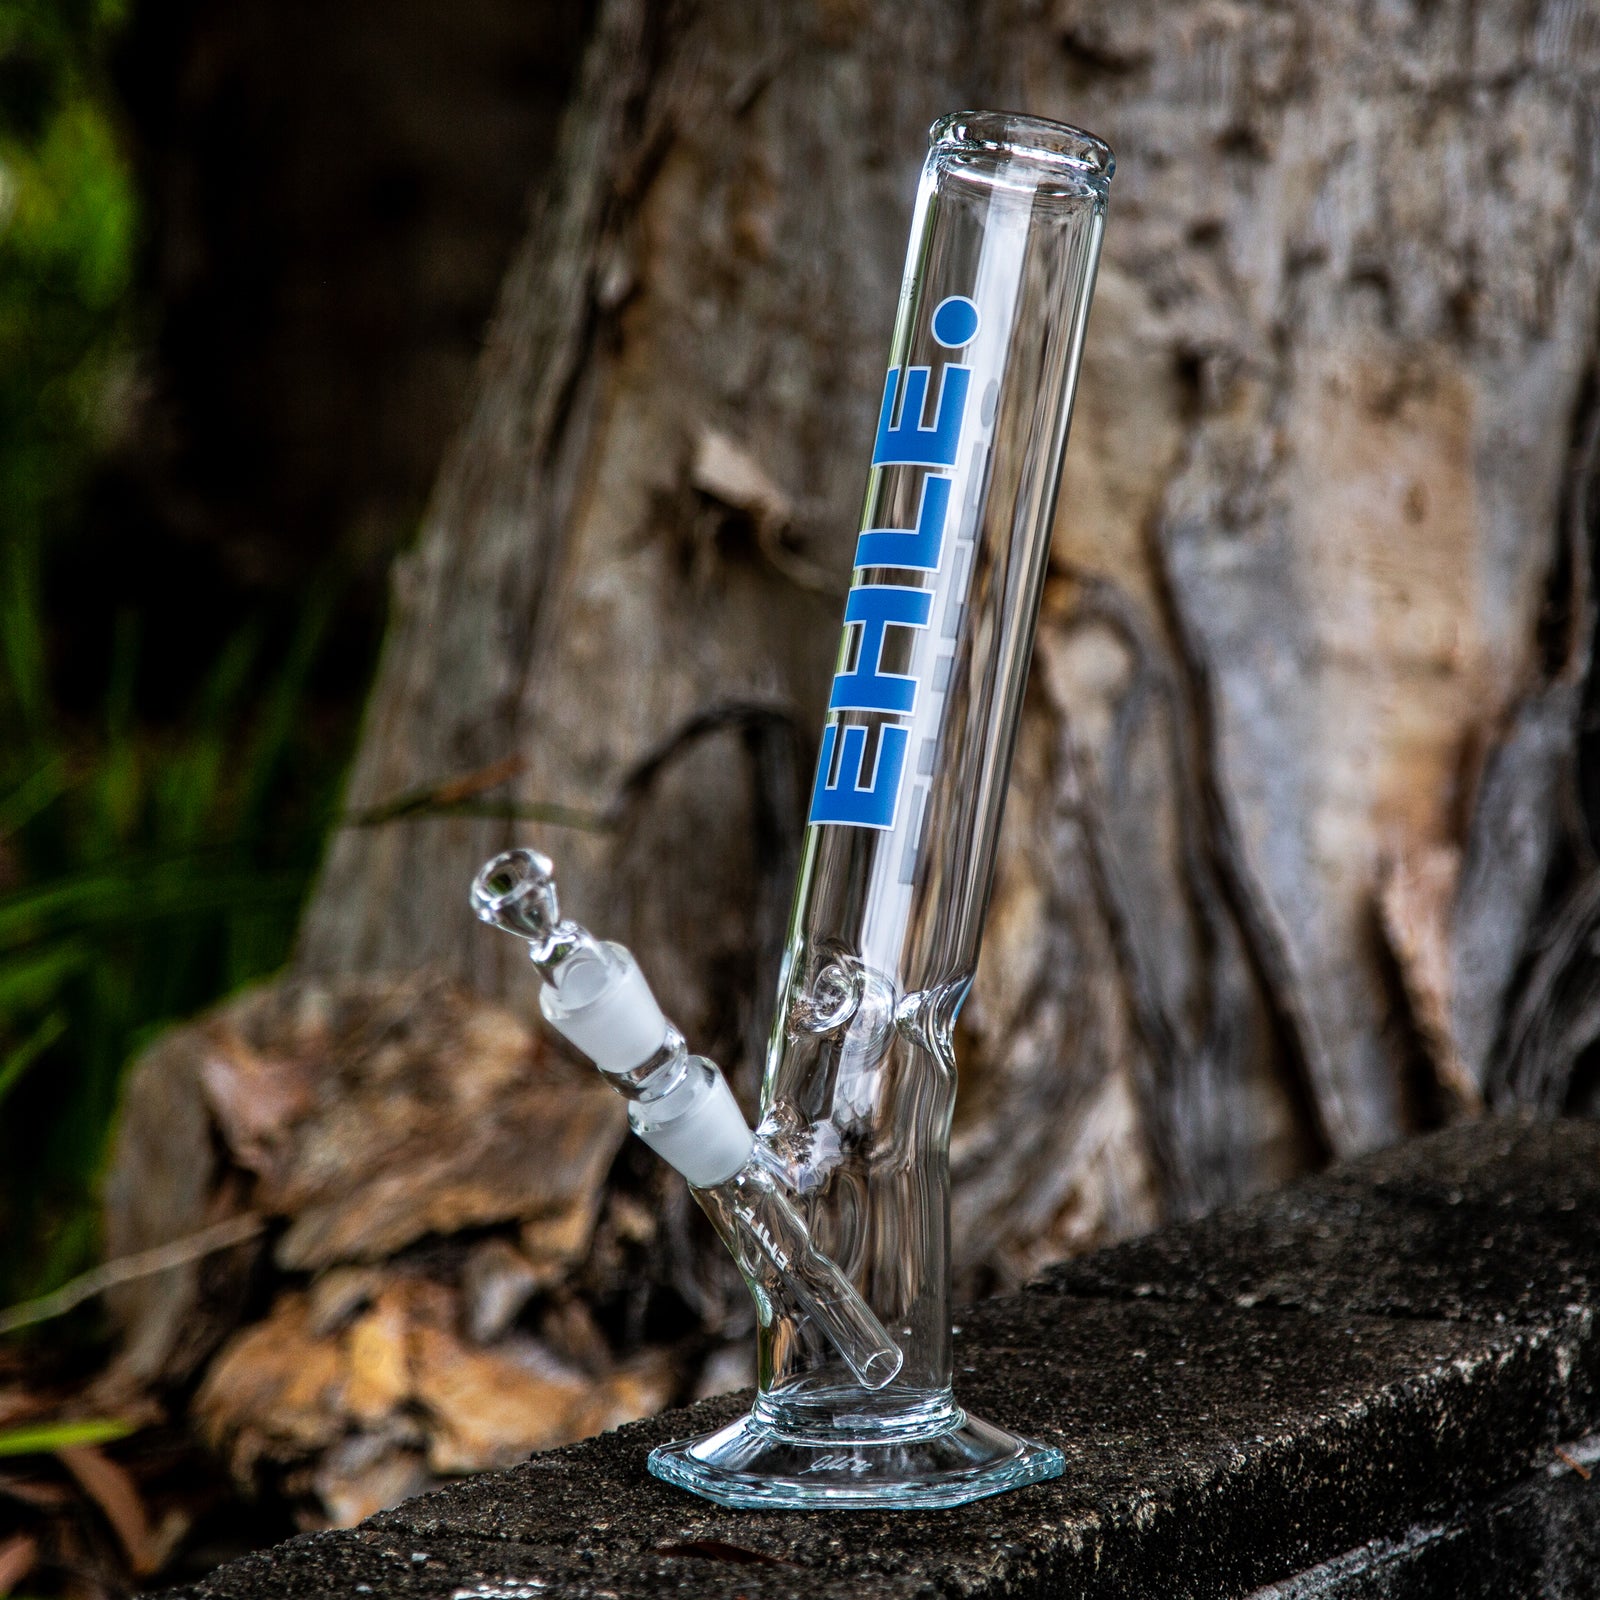 EHLE glass bongs and waterpipes.